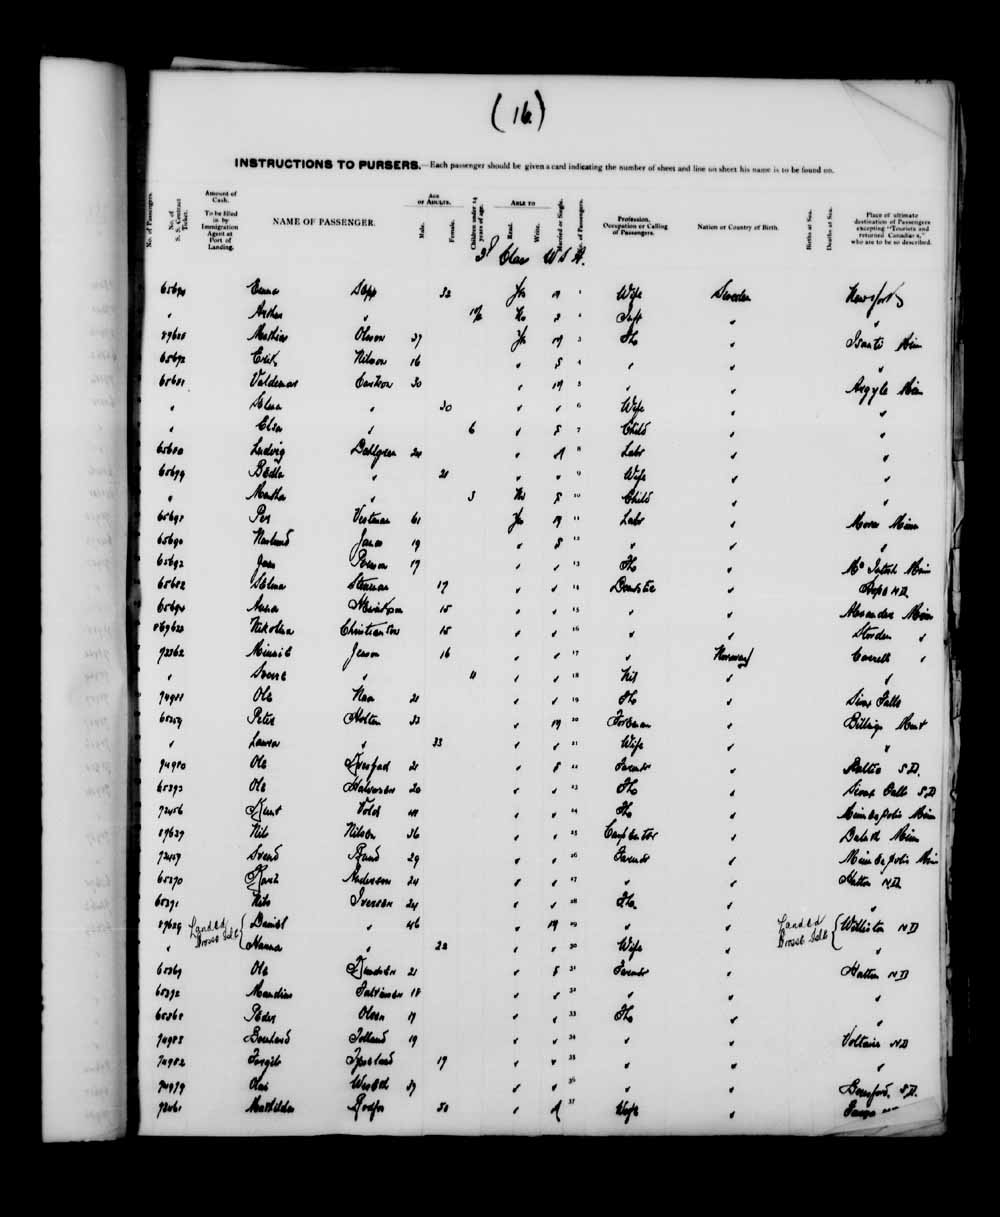 Digitized page of Quebec Passenger Lists for Image No.: e003591266